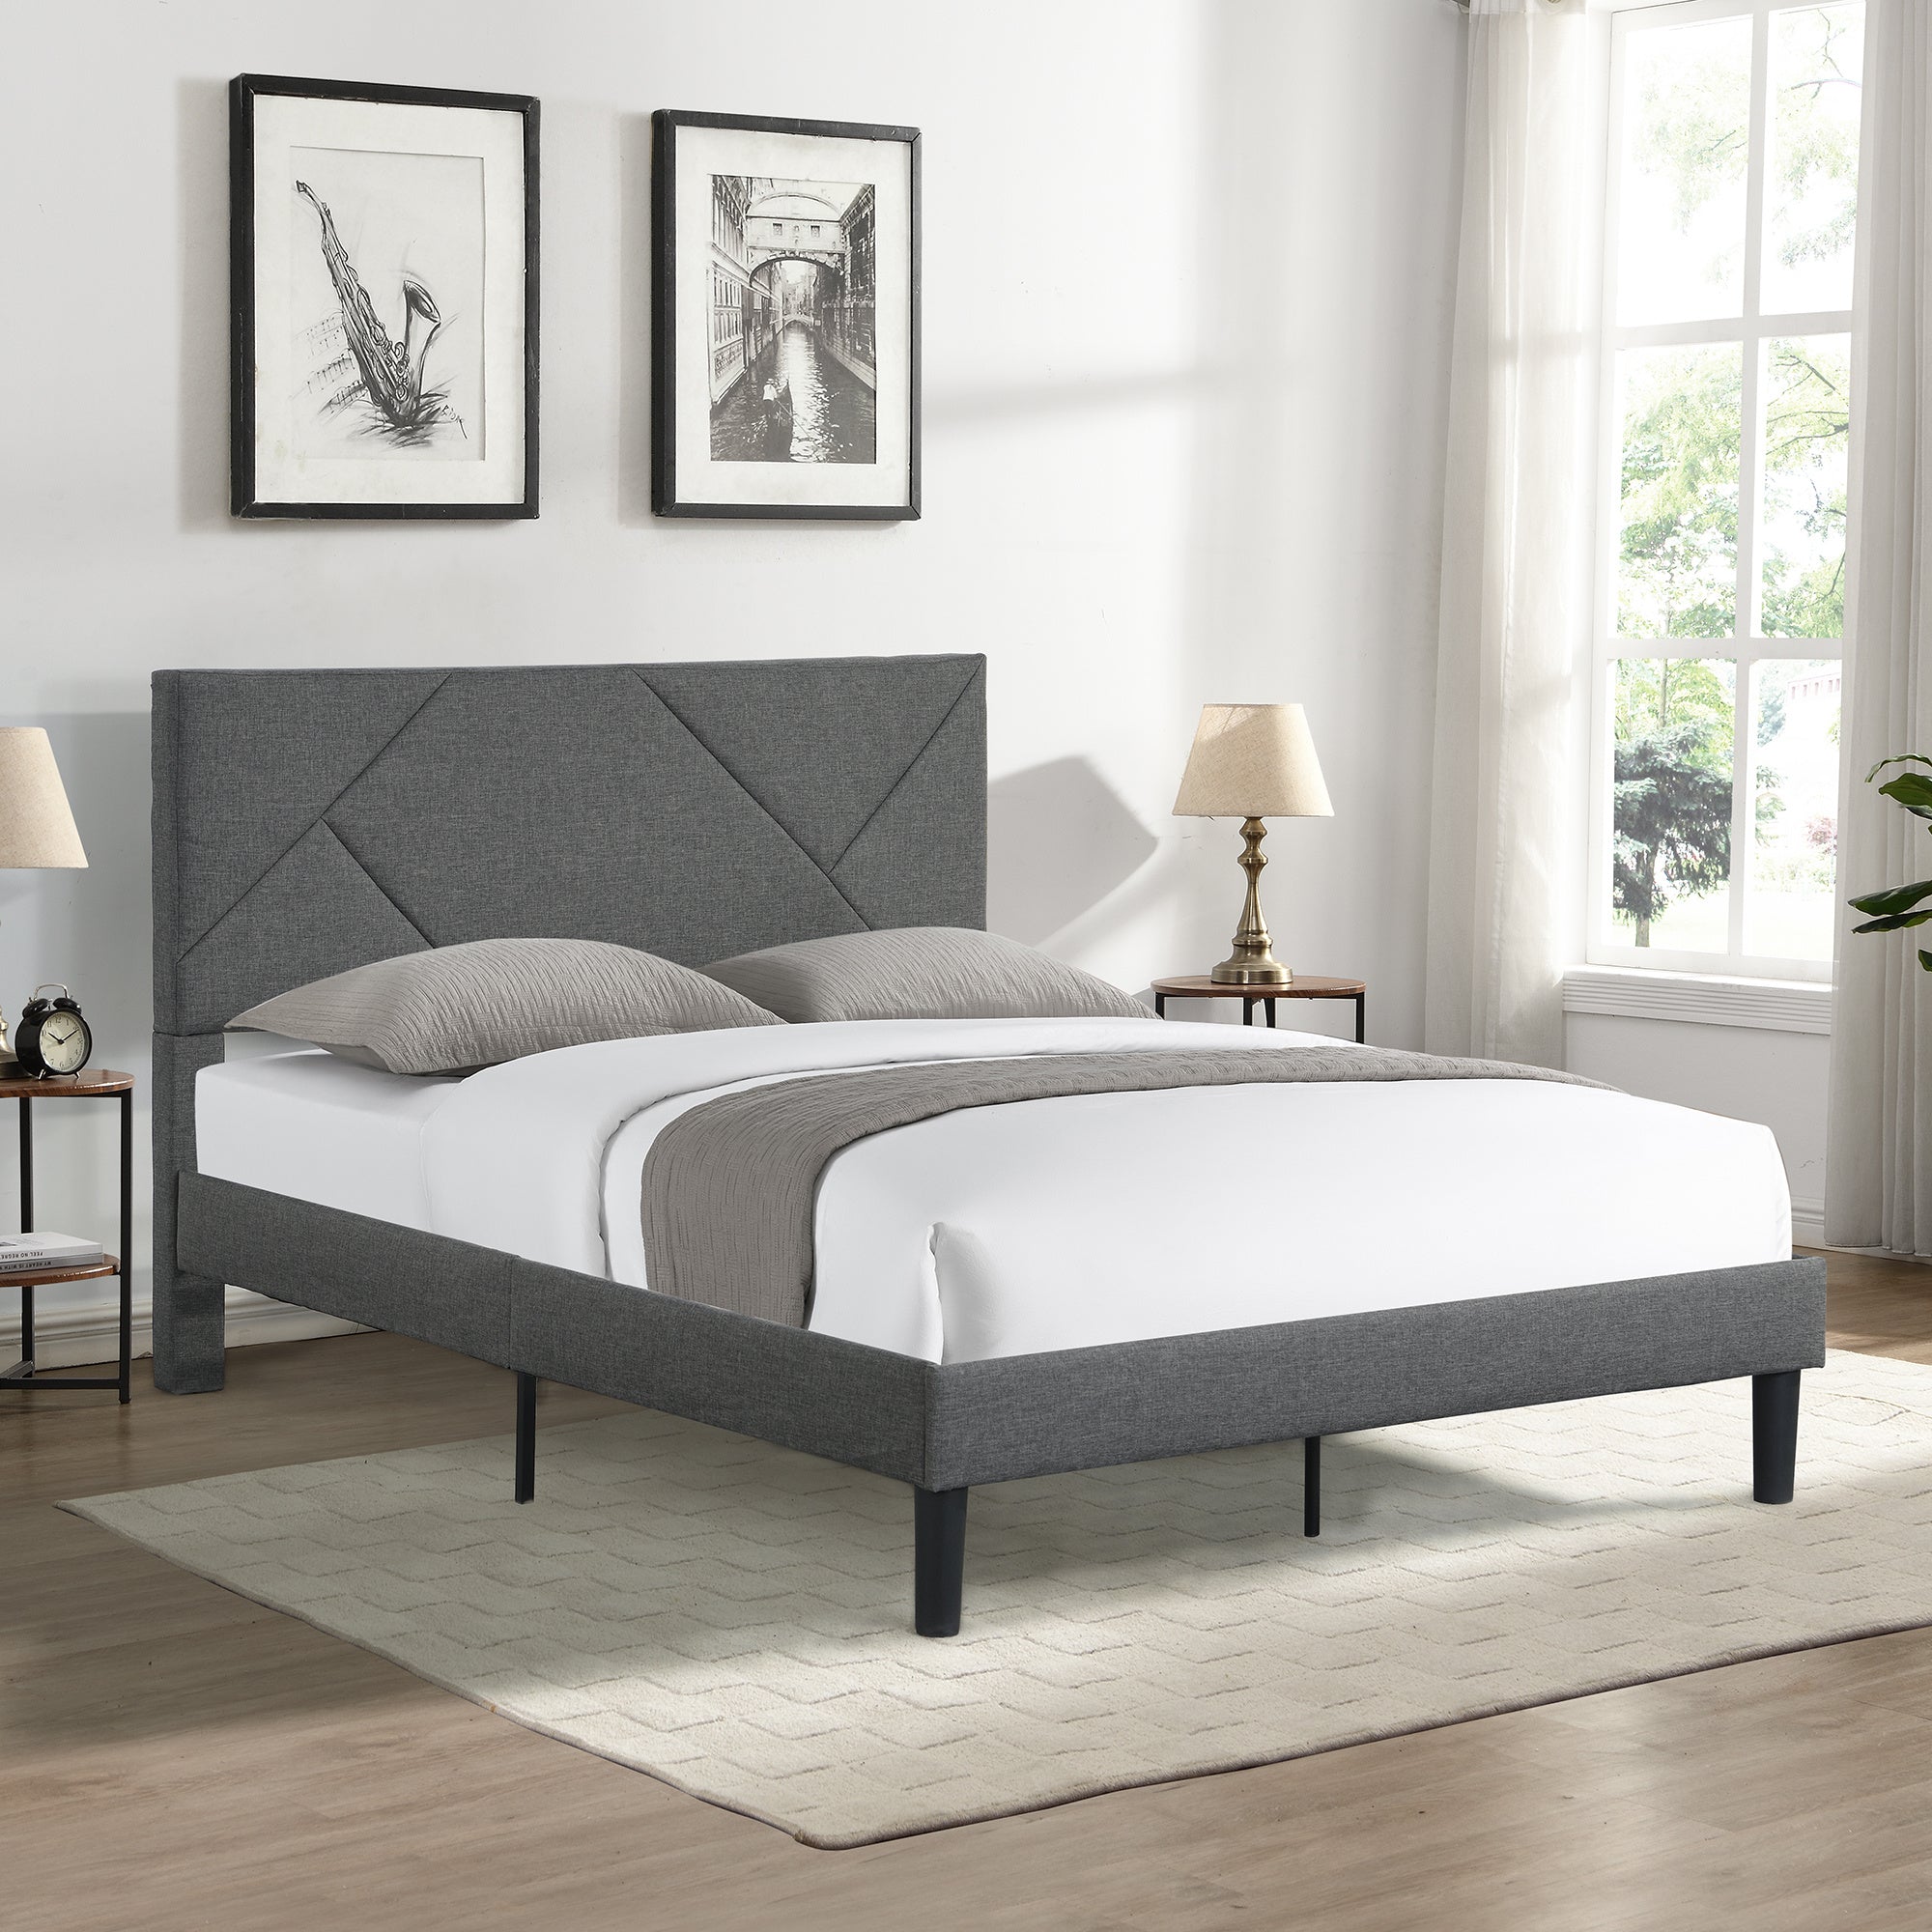 Queen Size Upholstered Platform Bed Frame with Headboard;  Strong Wood Slat Support;  Mattress Foundation;  No Box Spring Needed;  Easy Assembly;  Gray